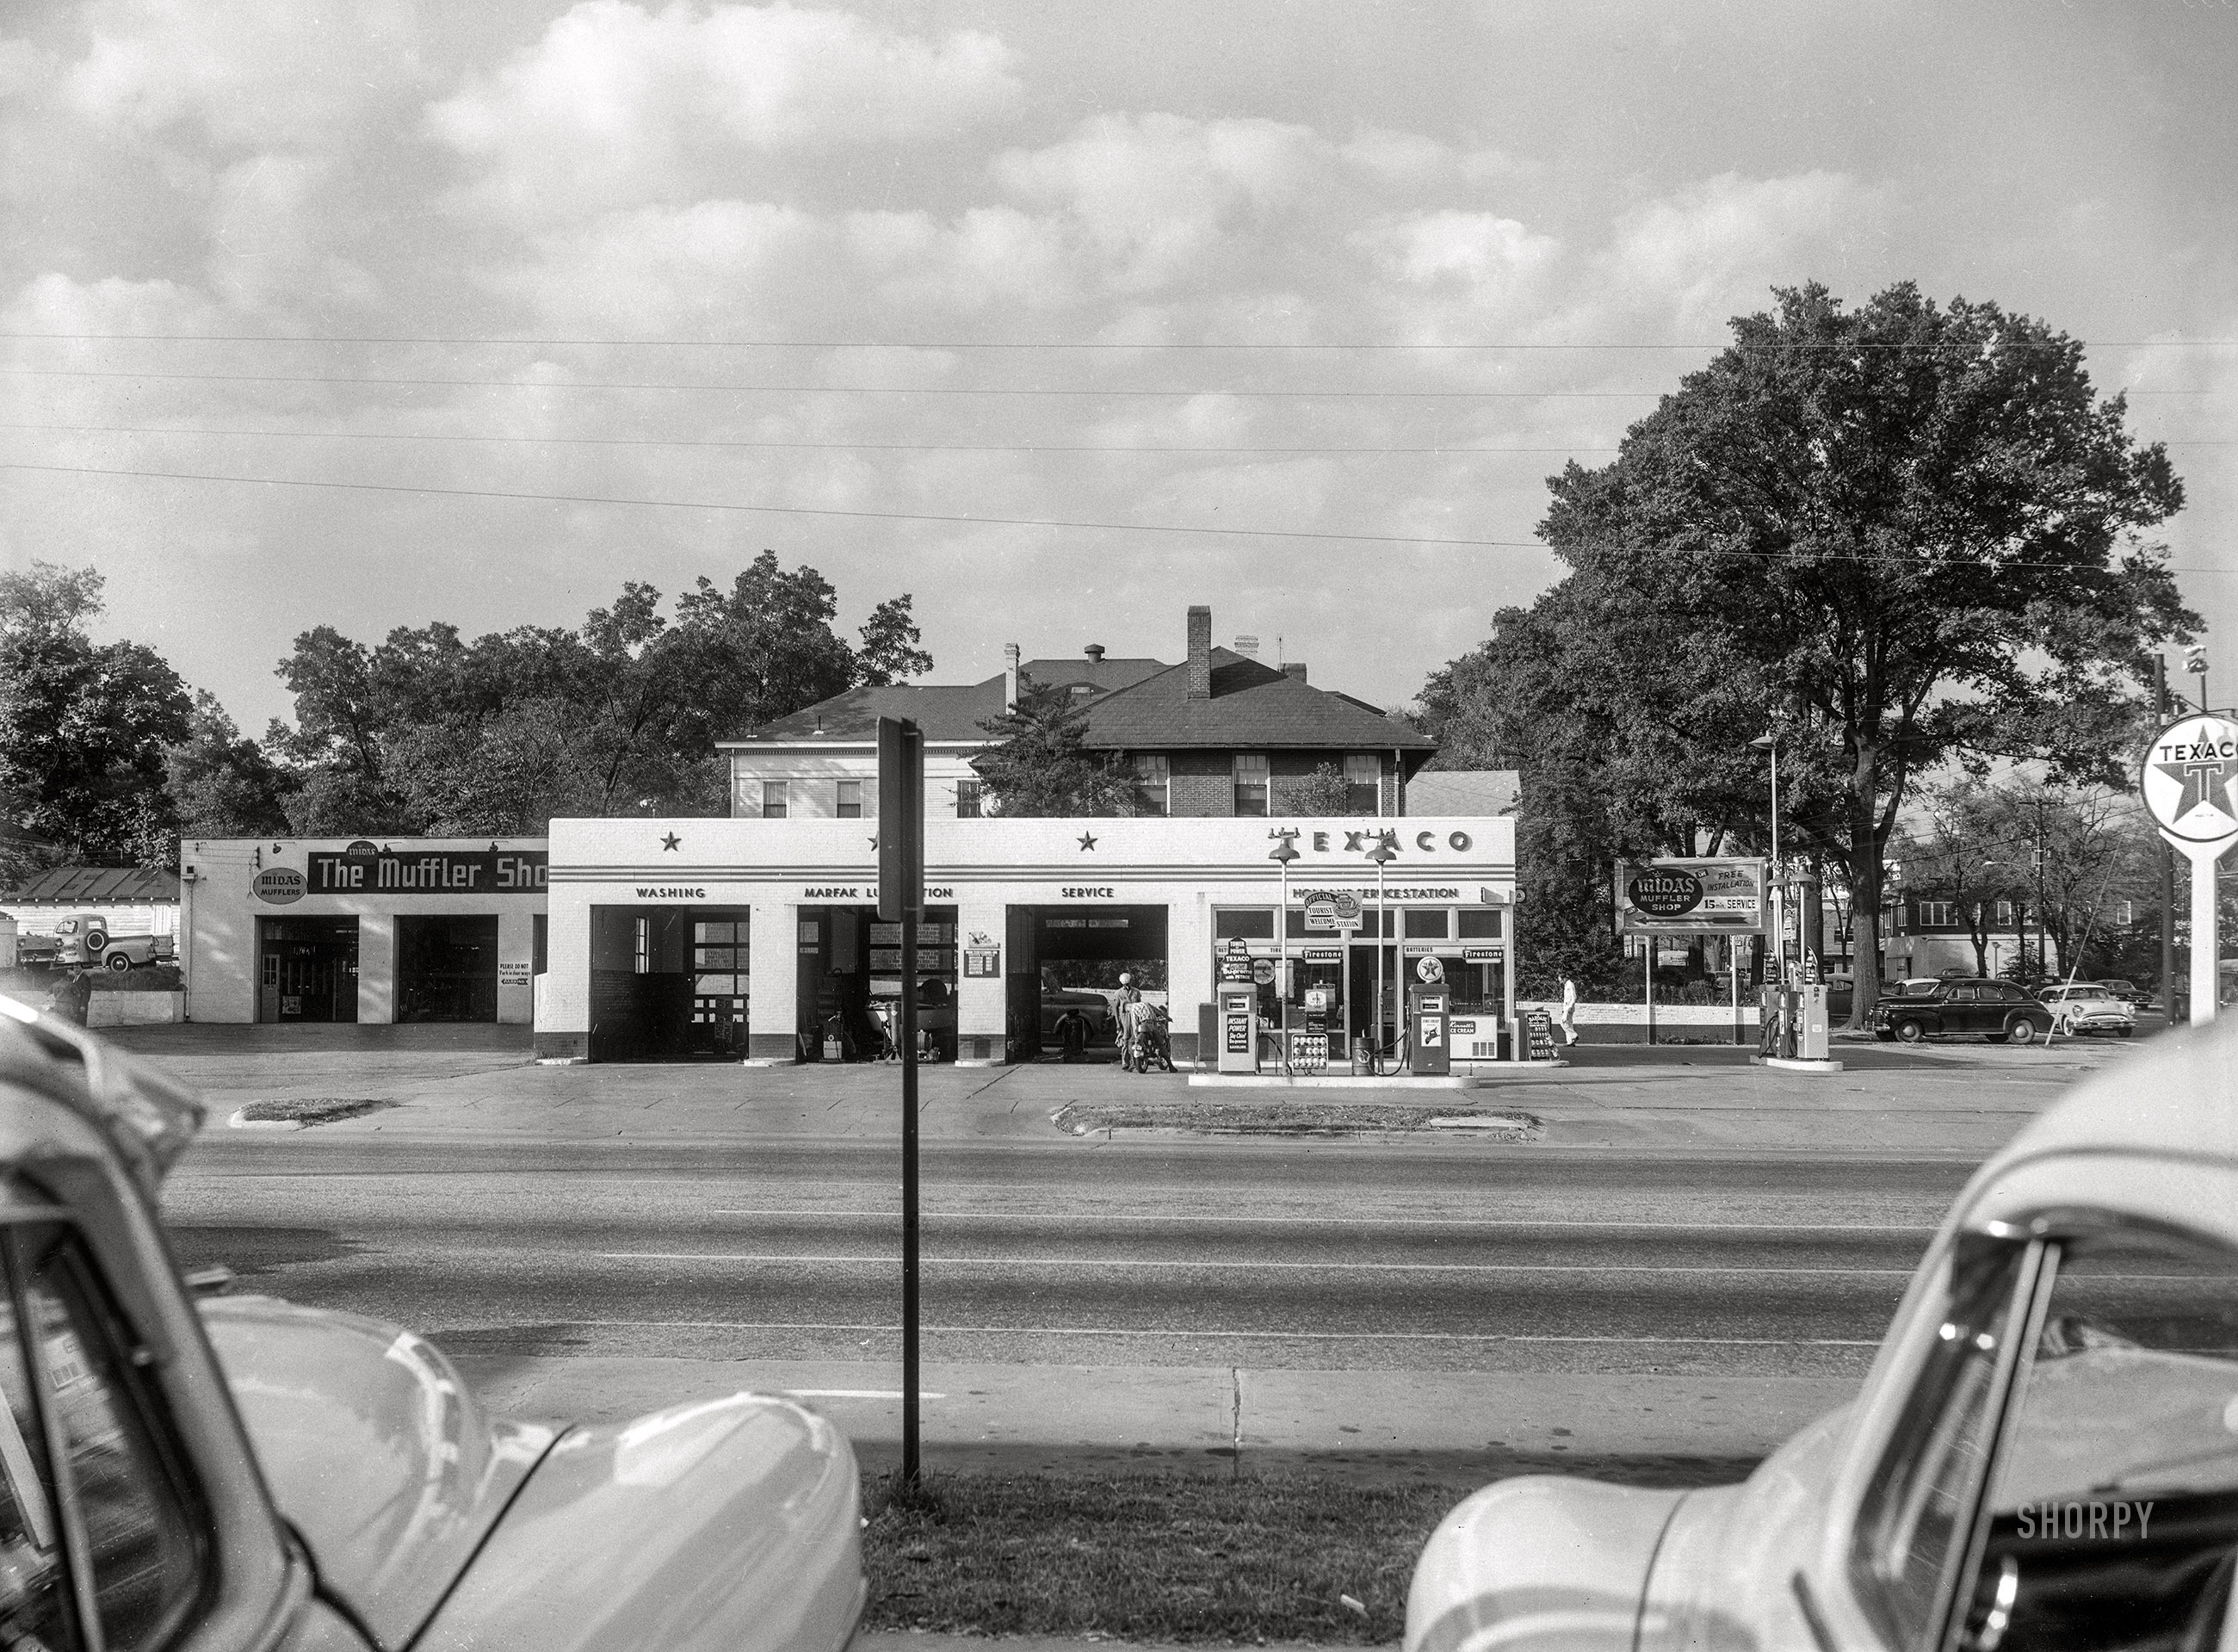 Columbus, Georgia, circa 1960. Our second look at John Holland's Texaco service station (and Midas Muffler shop, and "Official Georgia Tourist Welcome Station") on 13th Street.  4x5 inch acetate negative from the Shorpy News Photo Archive. View full size.